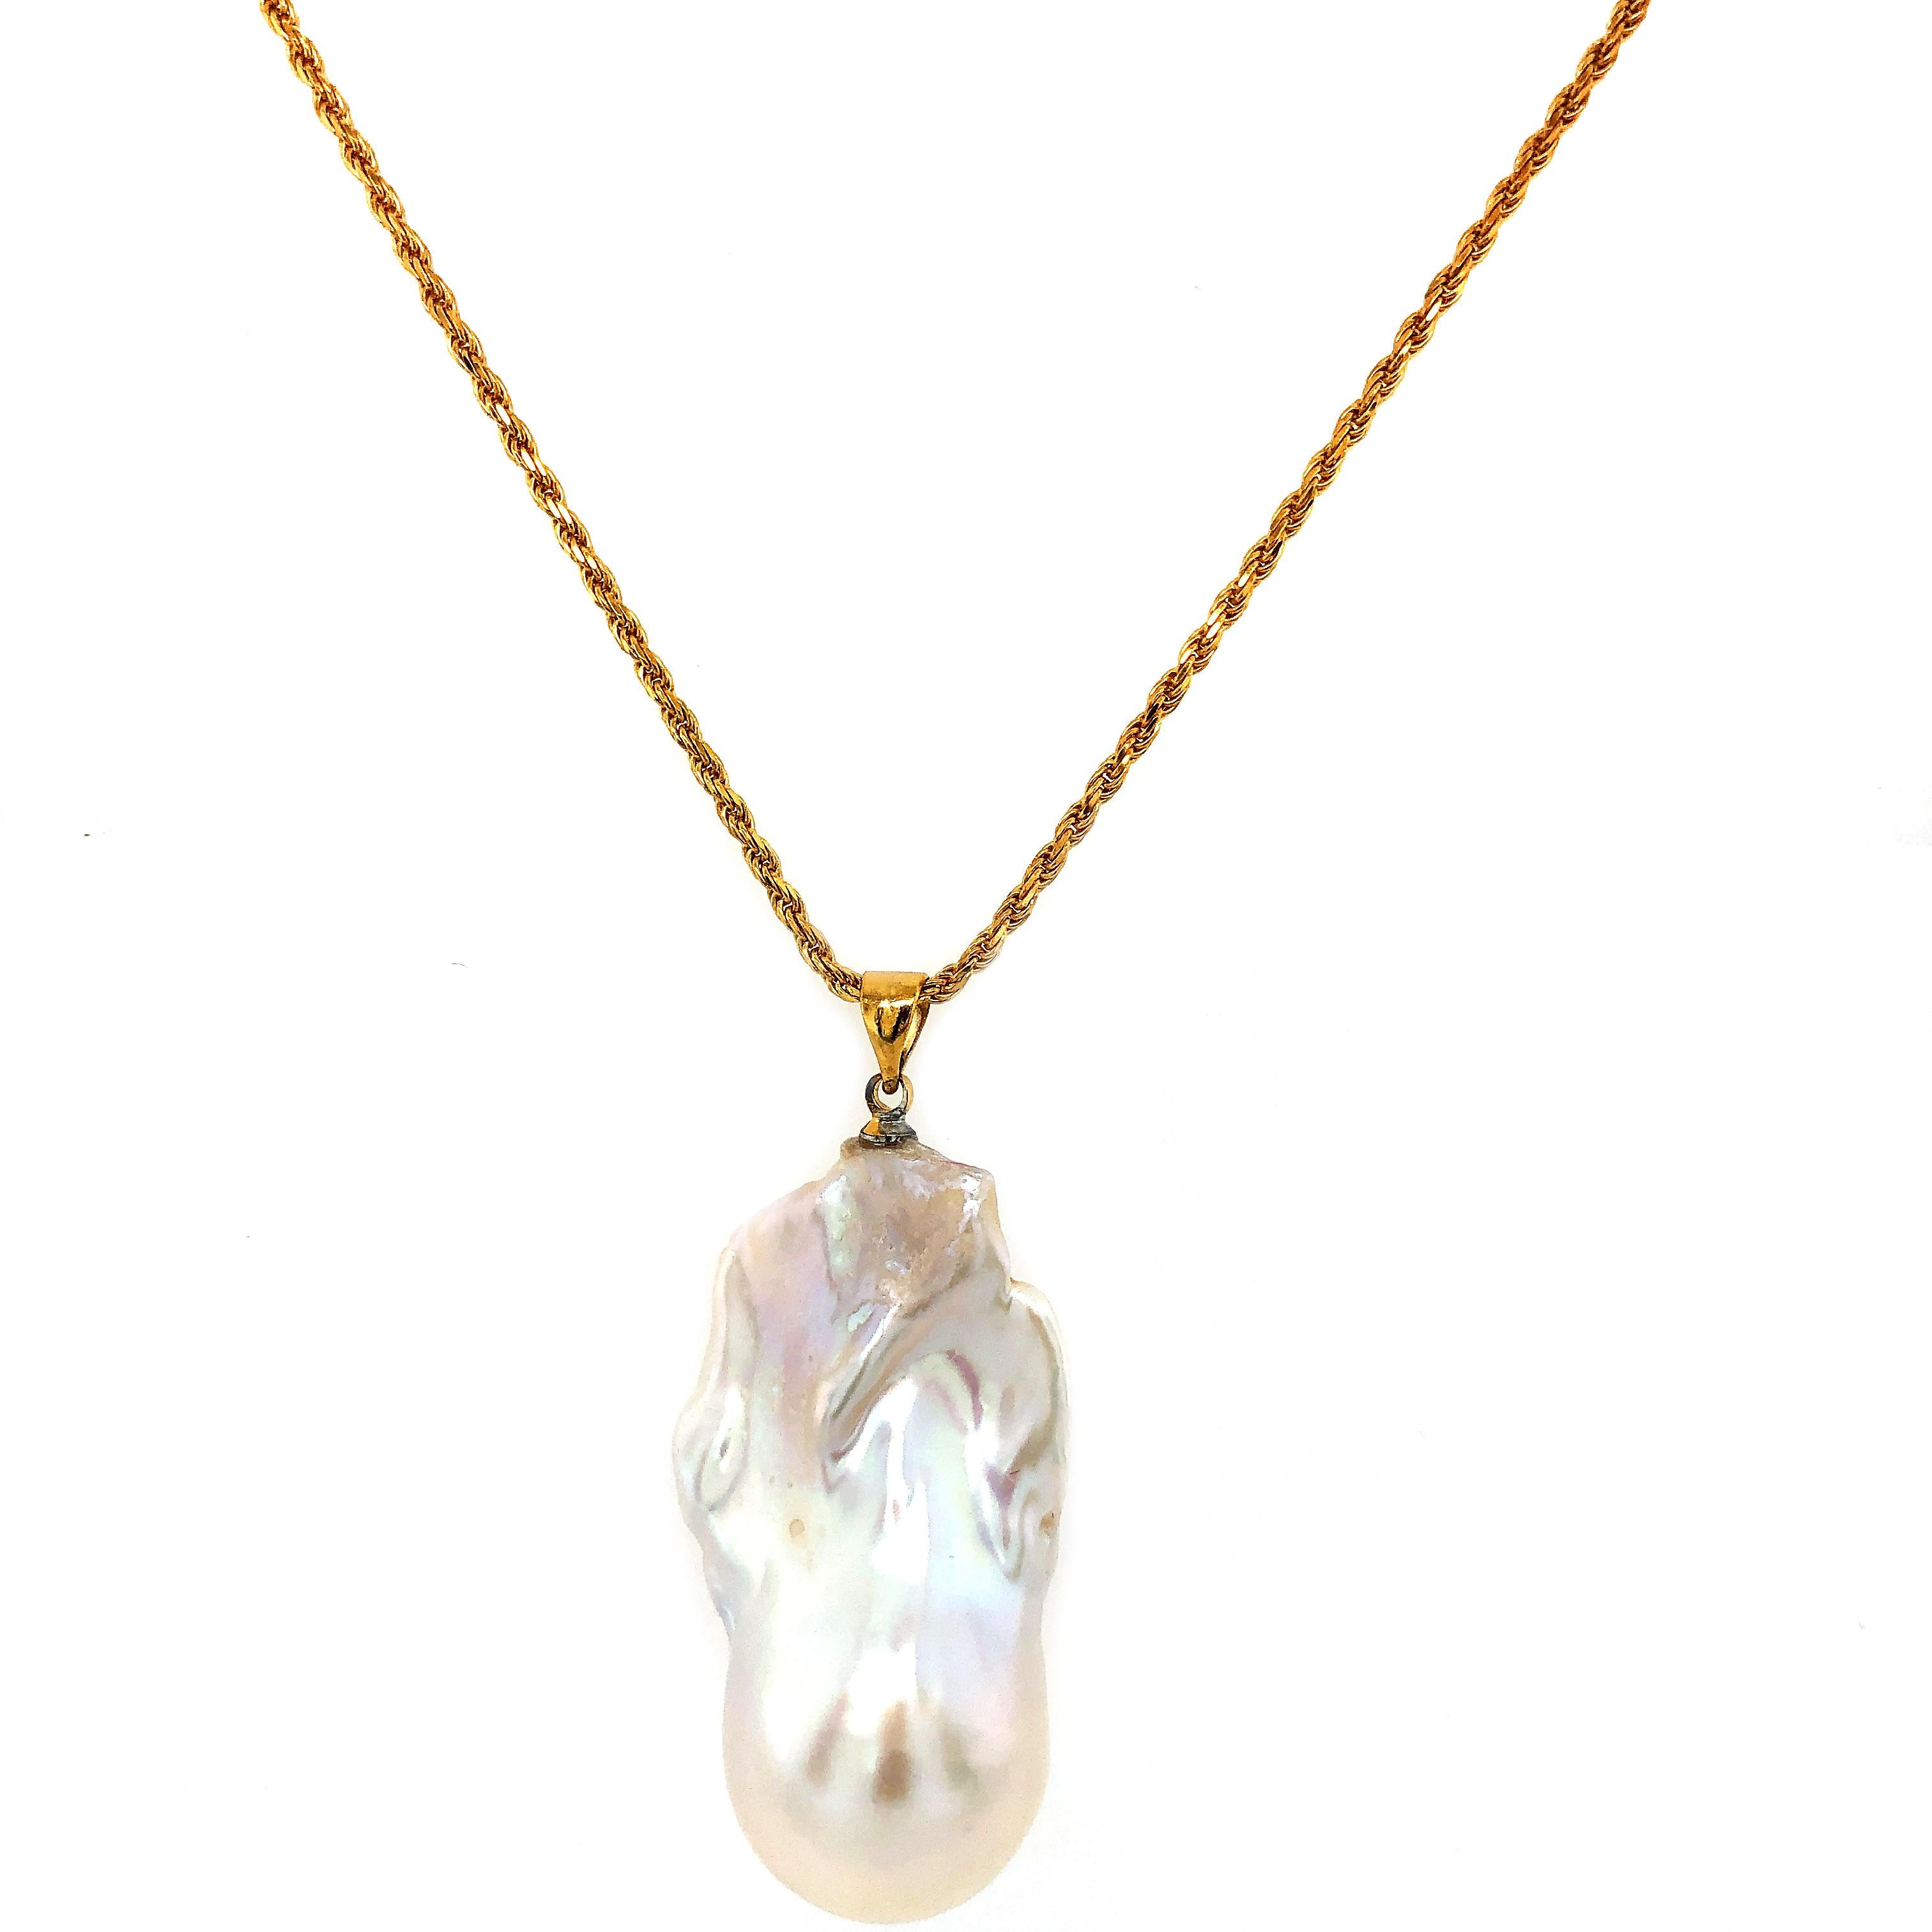 Large Freshwater Baroque Pearl Pendant Necklace on 18K Gold Vermeil Chain